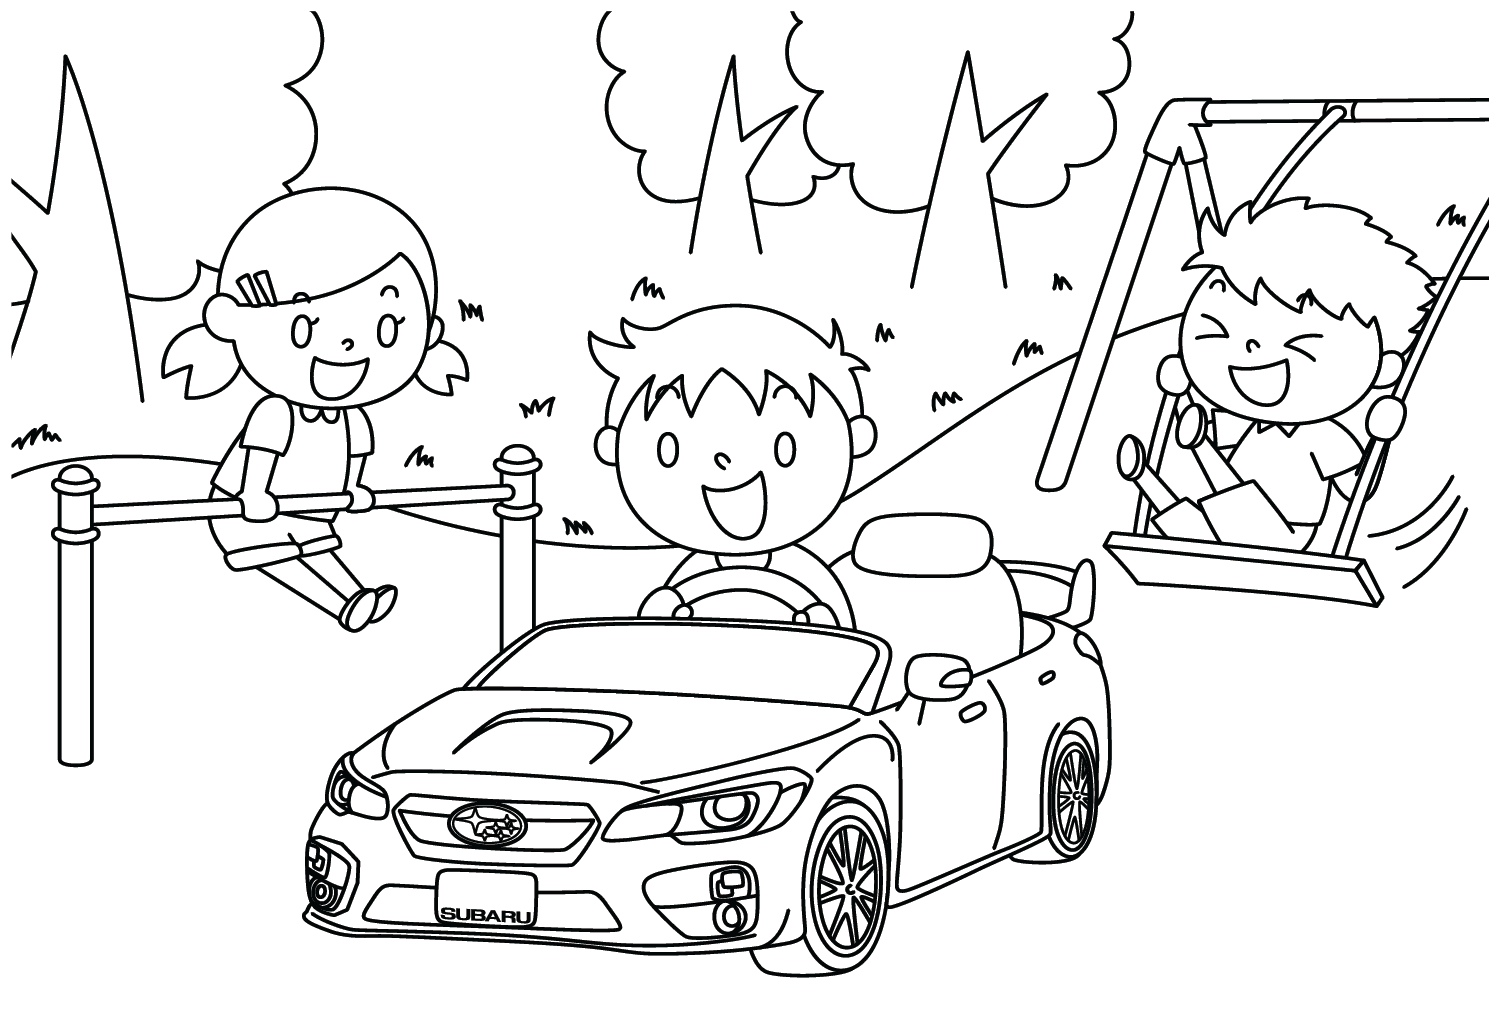 Subaru Coloring Page for Adults from Subaru